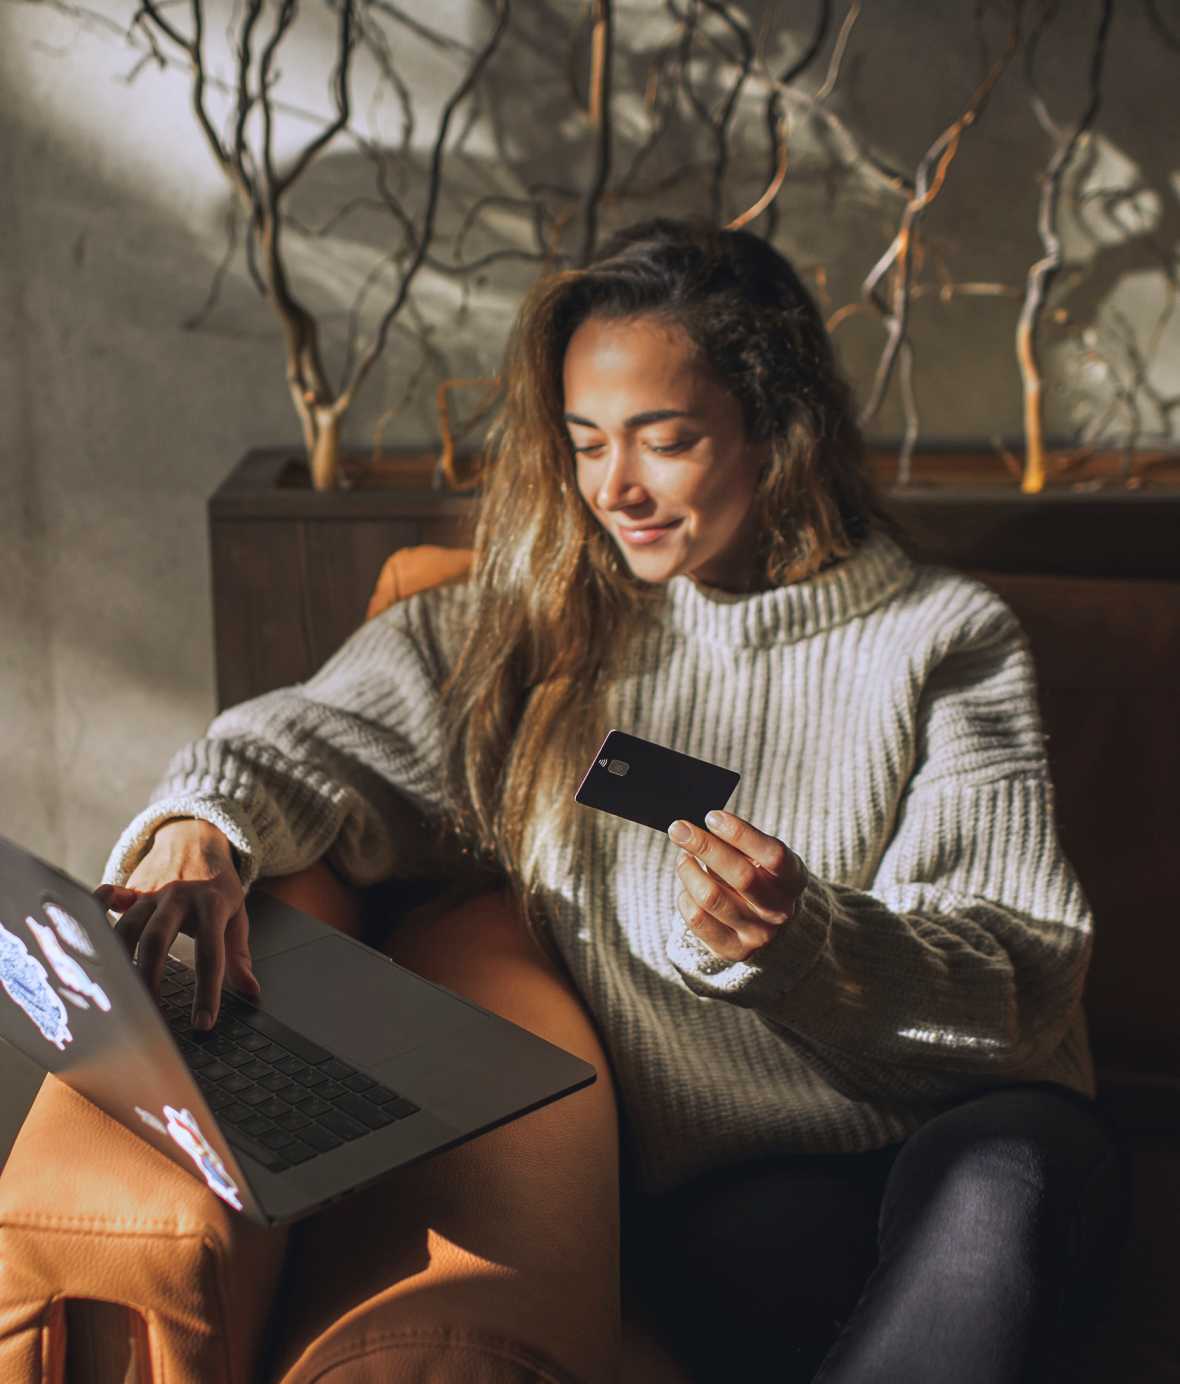 Young woman in sweater sitting on couch with laptop out and credit card in hand.